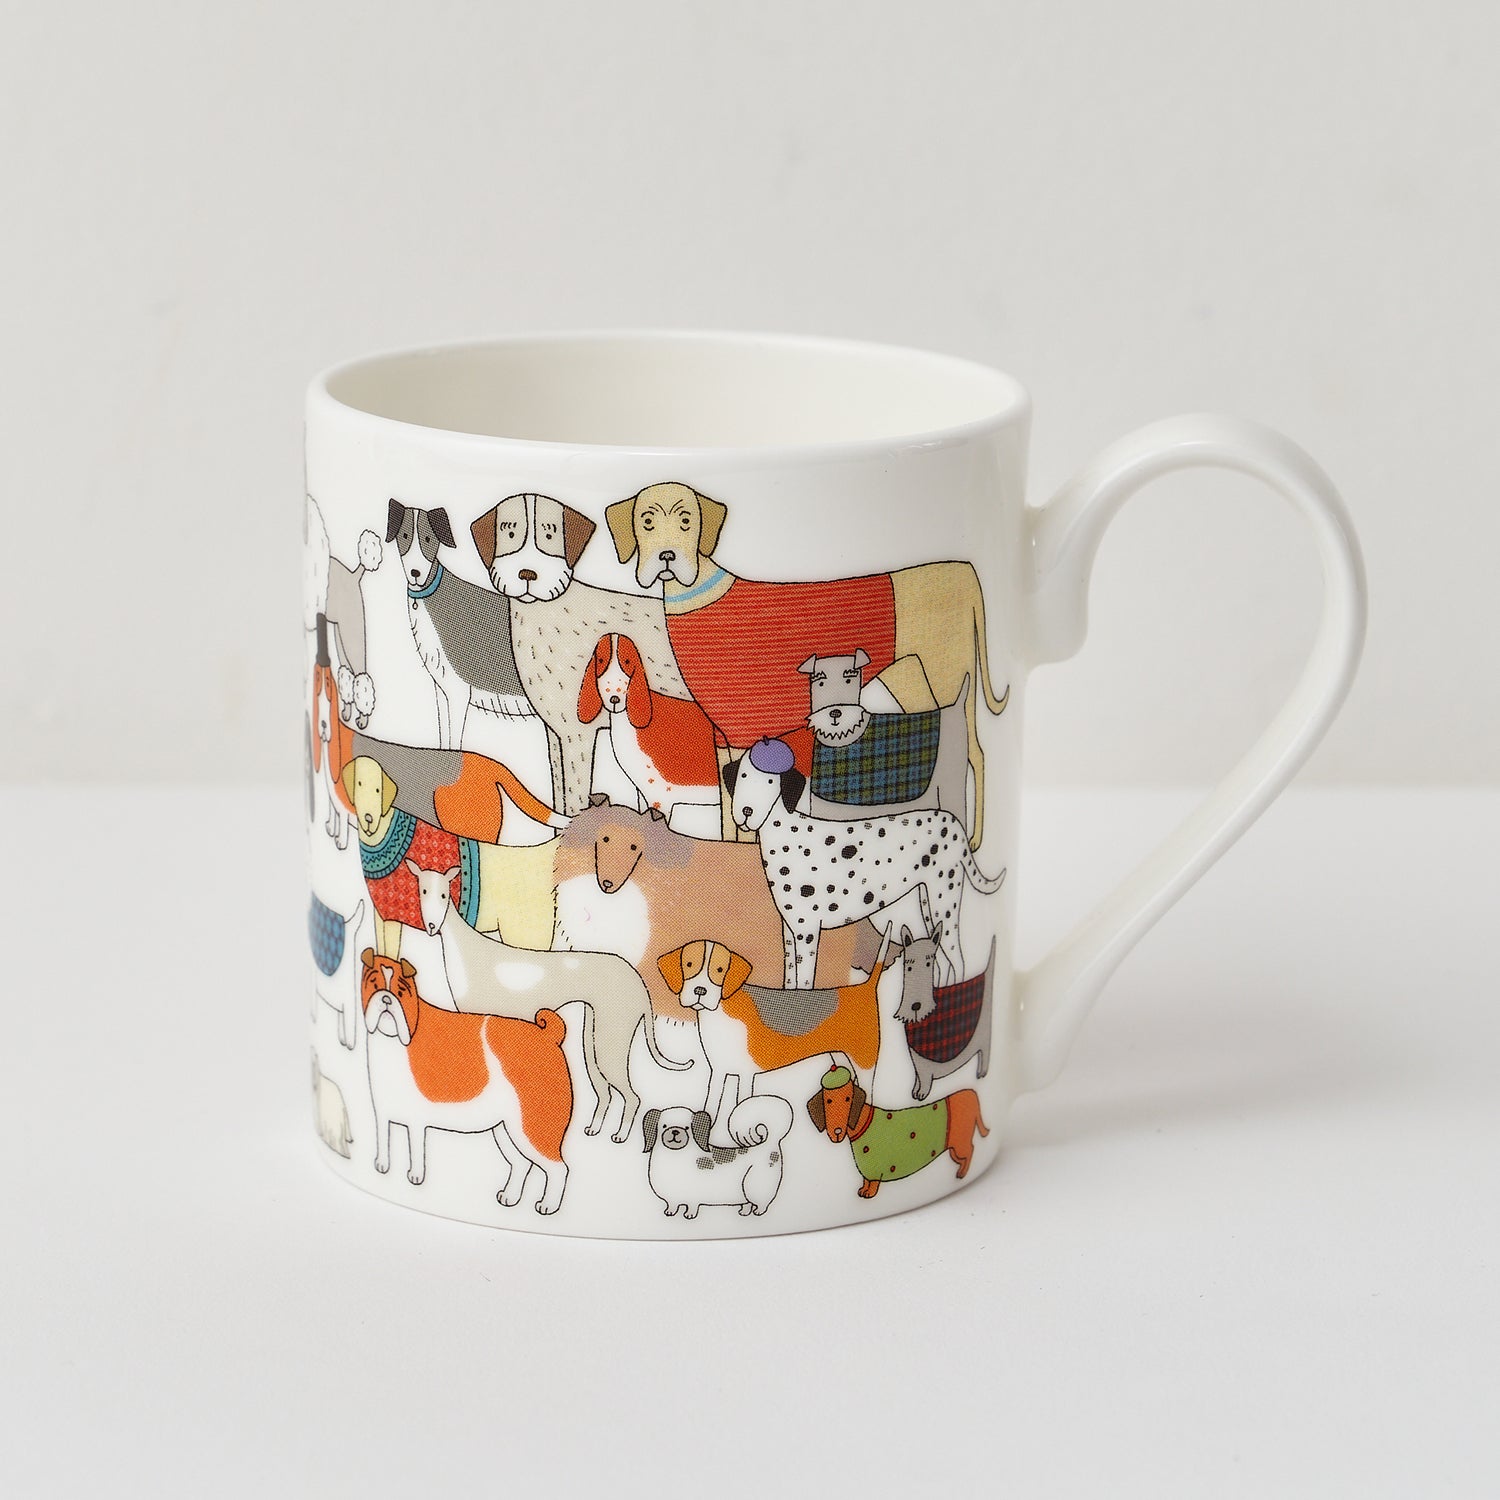 Pack of Proud Pooches Mug by Mary Kilvert